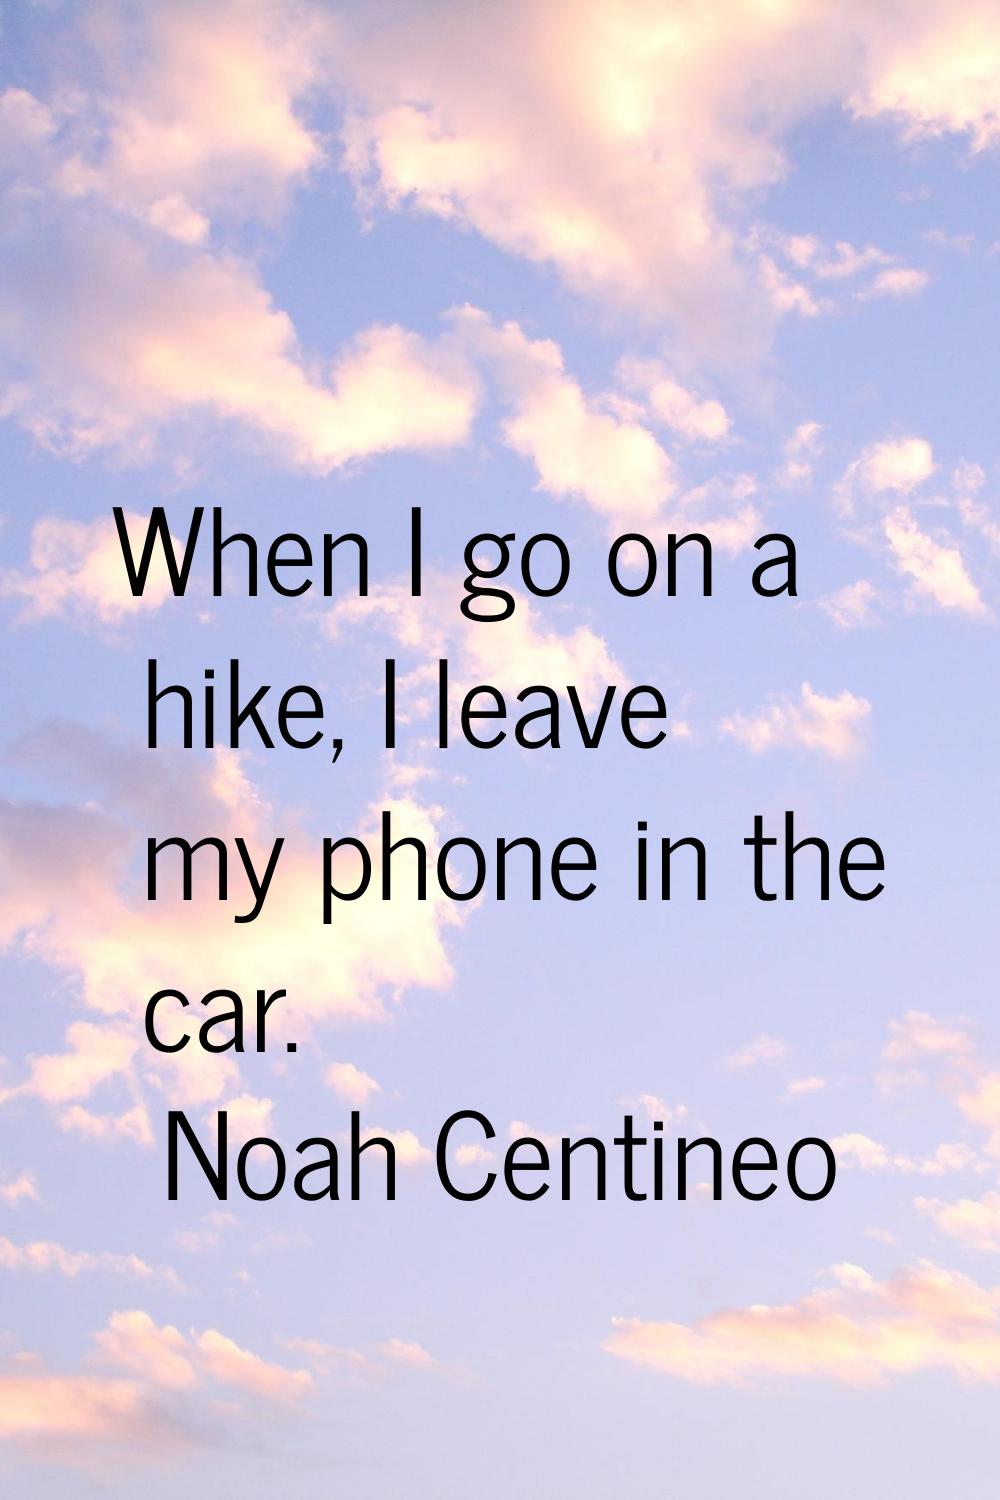 When I go on a hike, I leave my phone in the car.